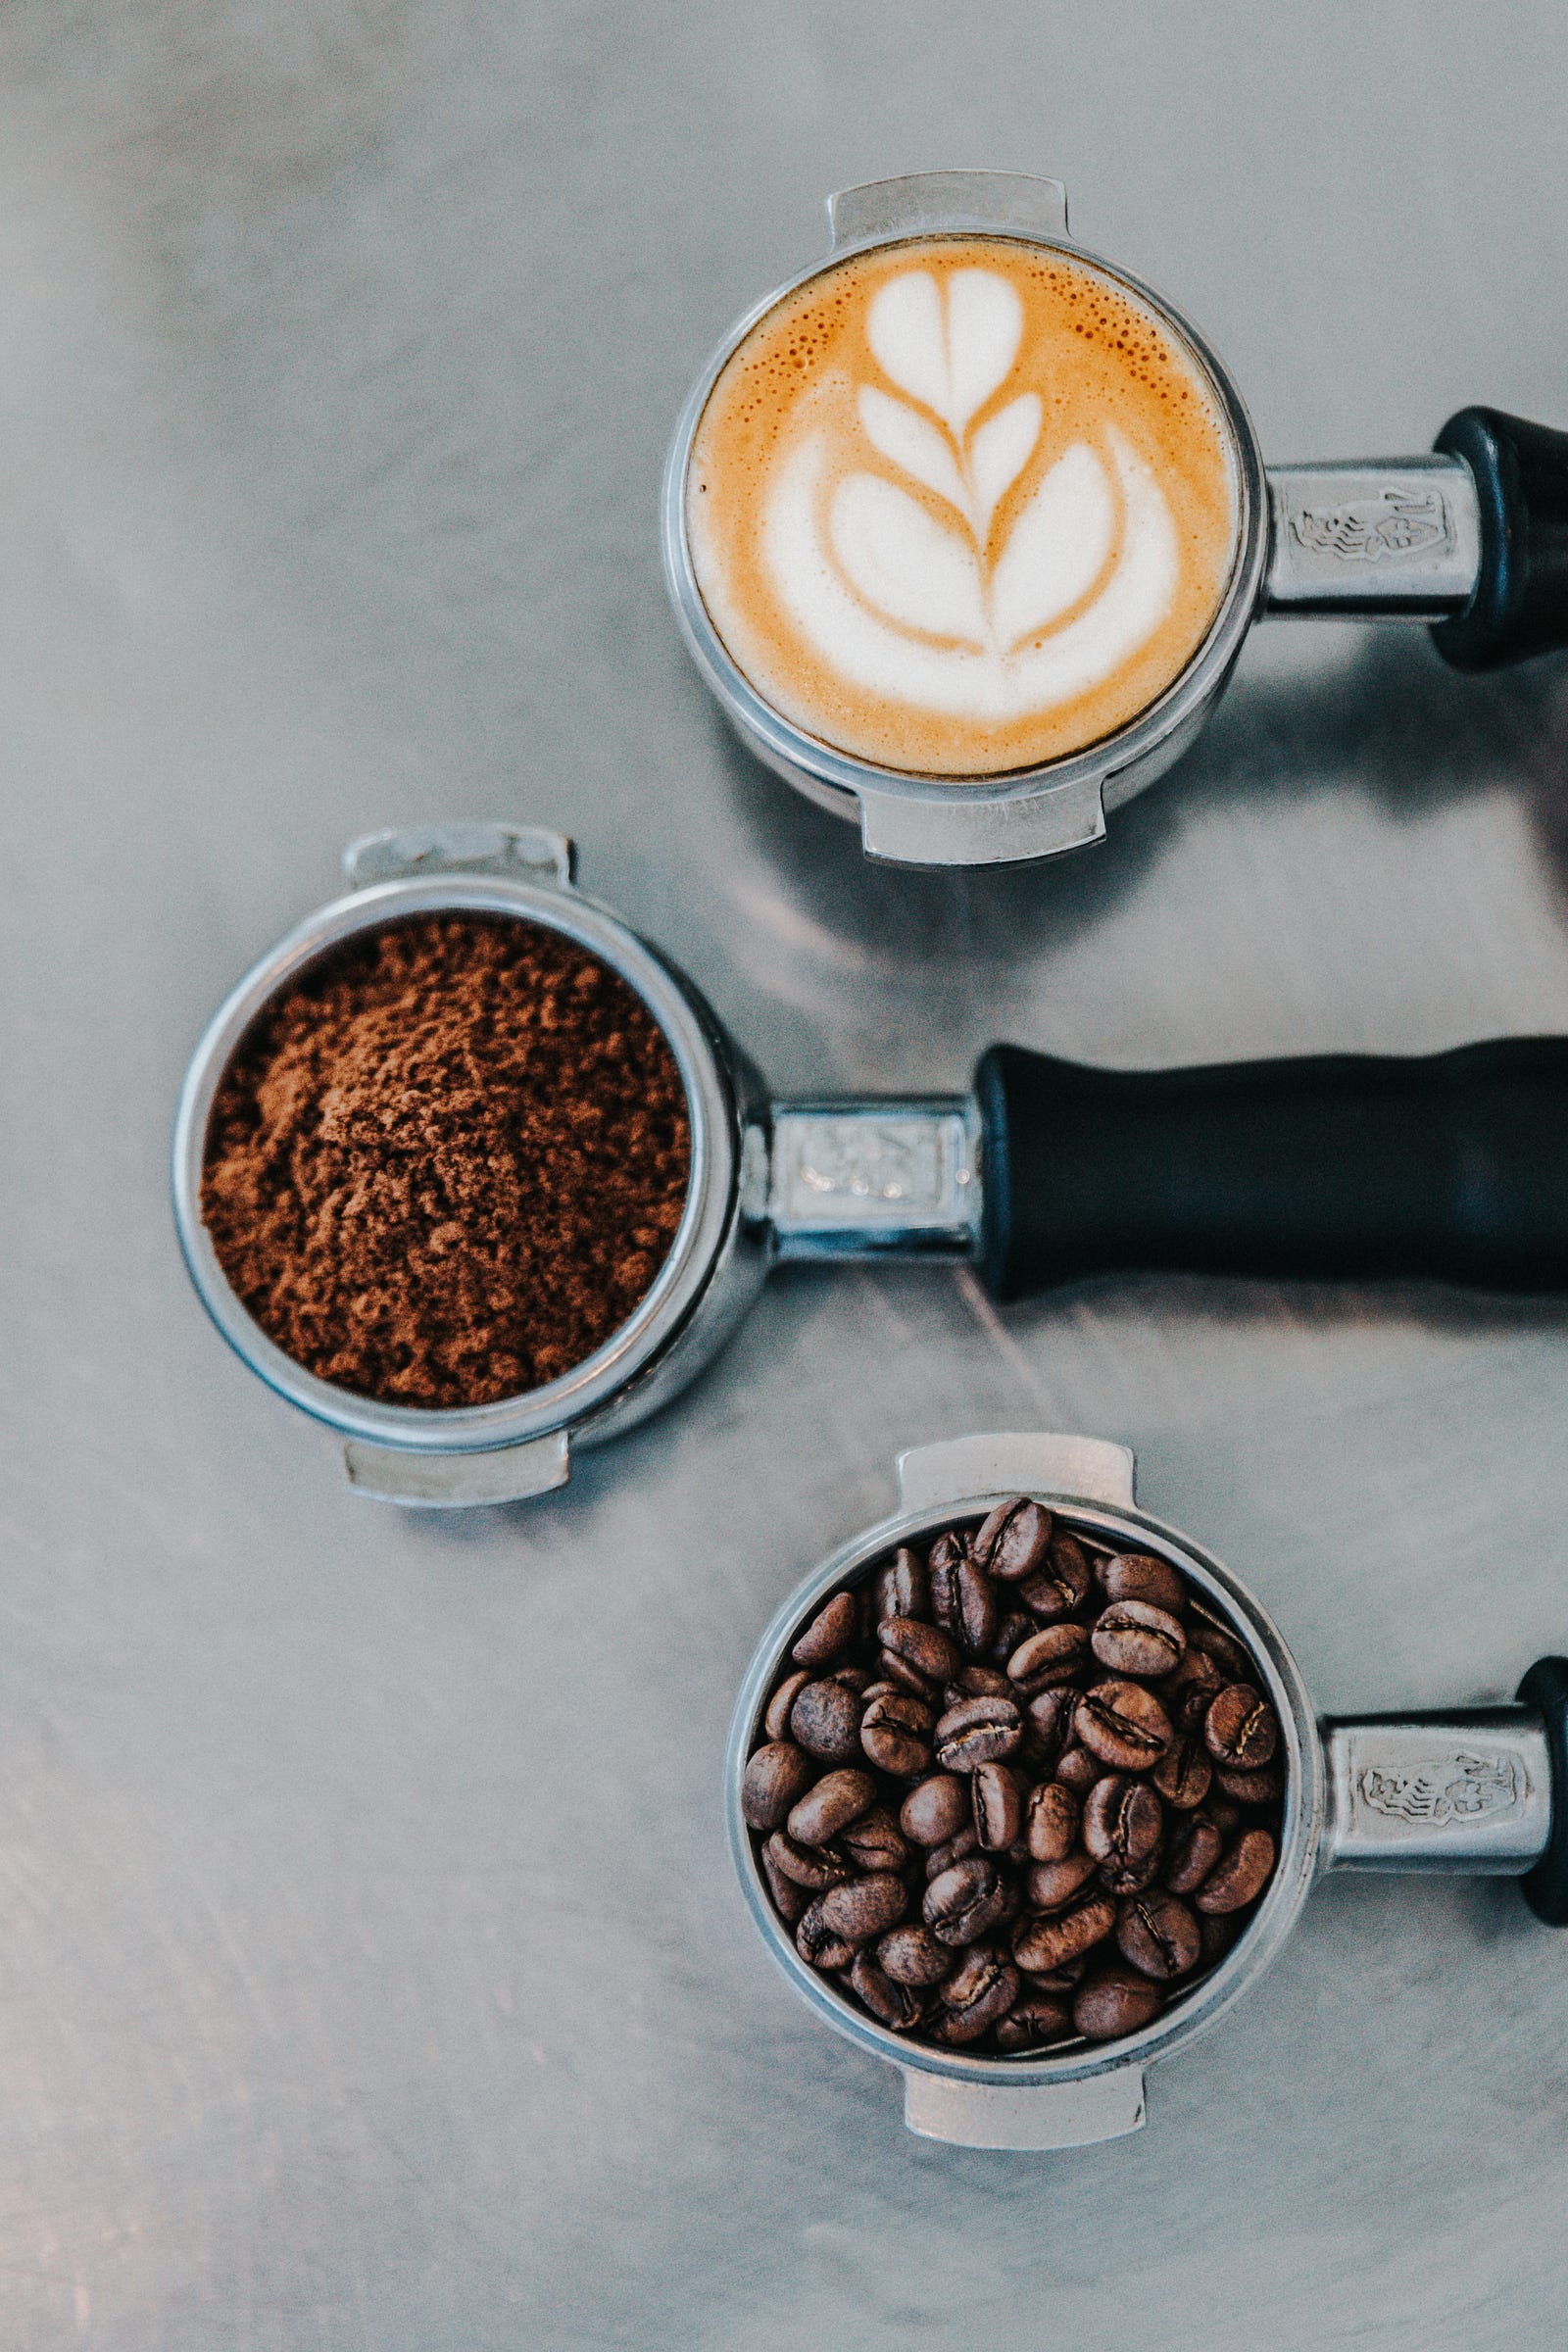 Three coffee grinding spoons emerge from the left. Mixing a high-caffeine energy drink and alcohol can mask alcohol’s effect, leading to over-drinking. Moreover, combining alcohol and caffeine can make you less likely to feel alcohol’s effects on your body.